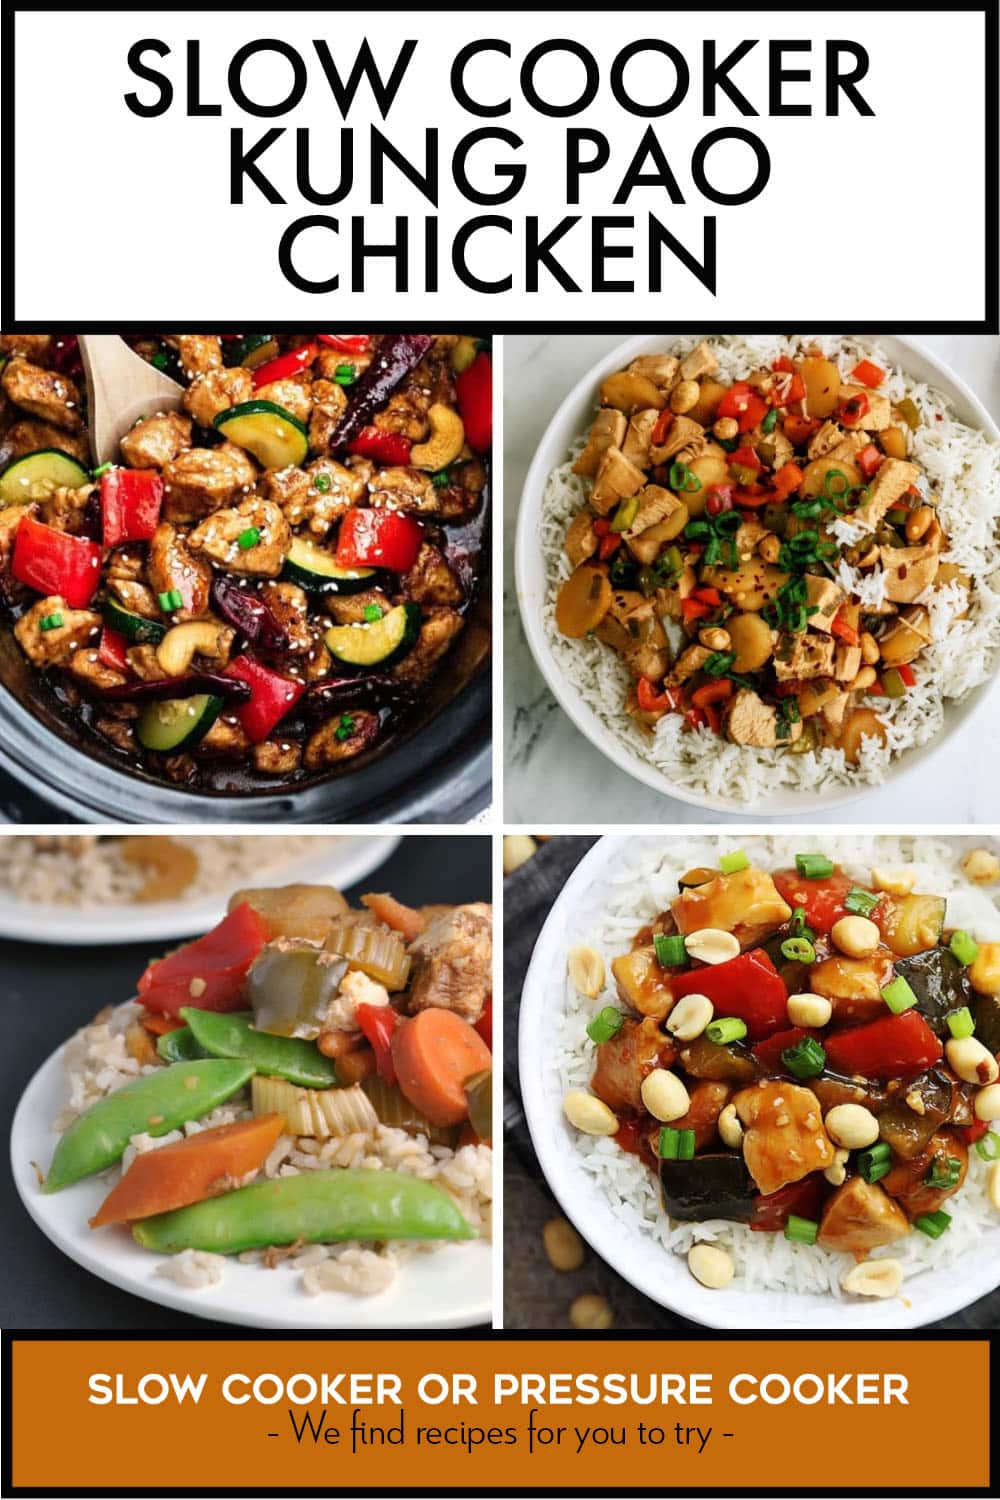 Pinterest image of Slow Cooker Kung Pao Chicken